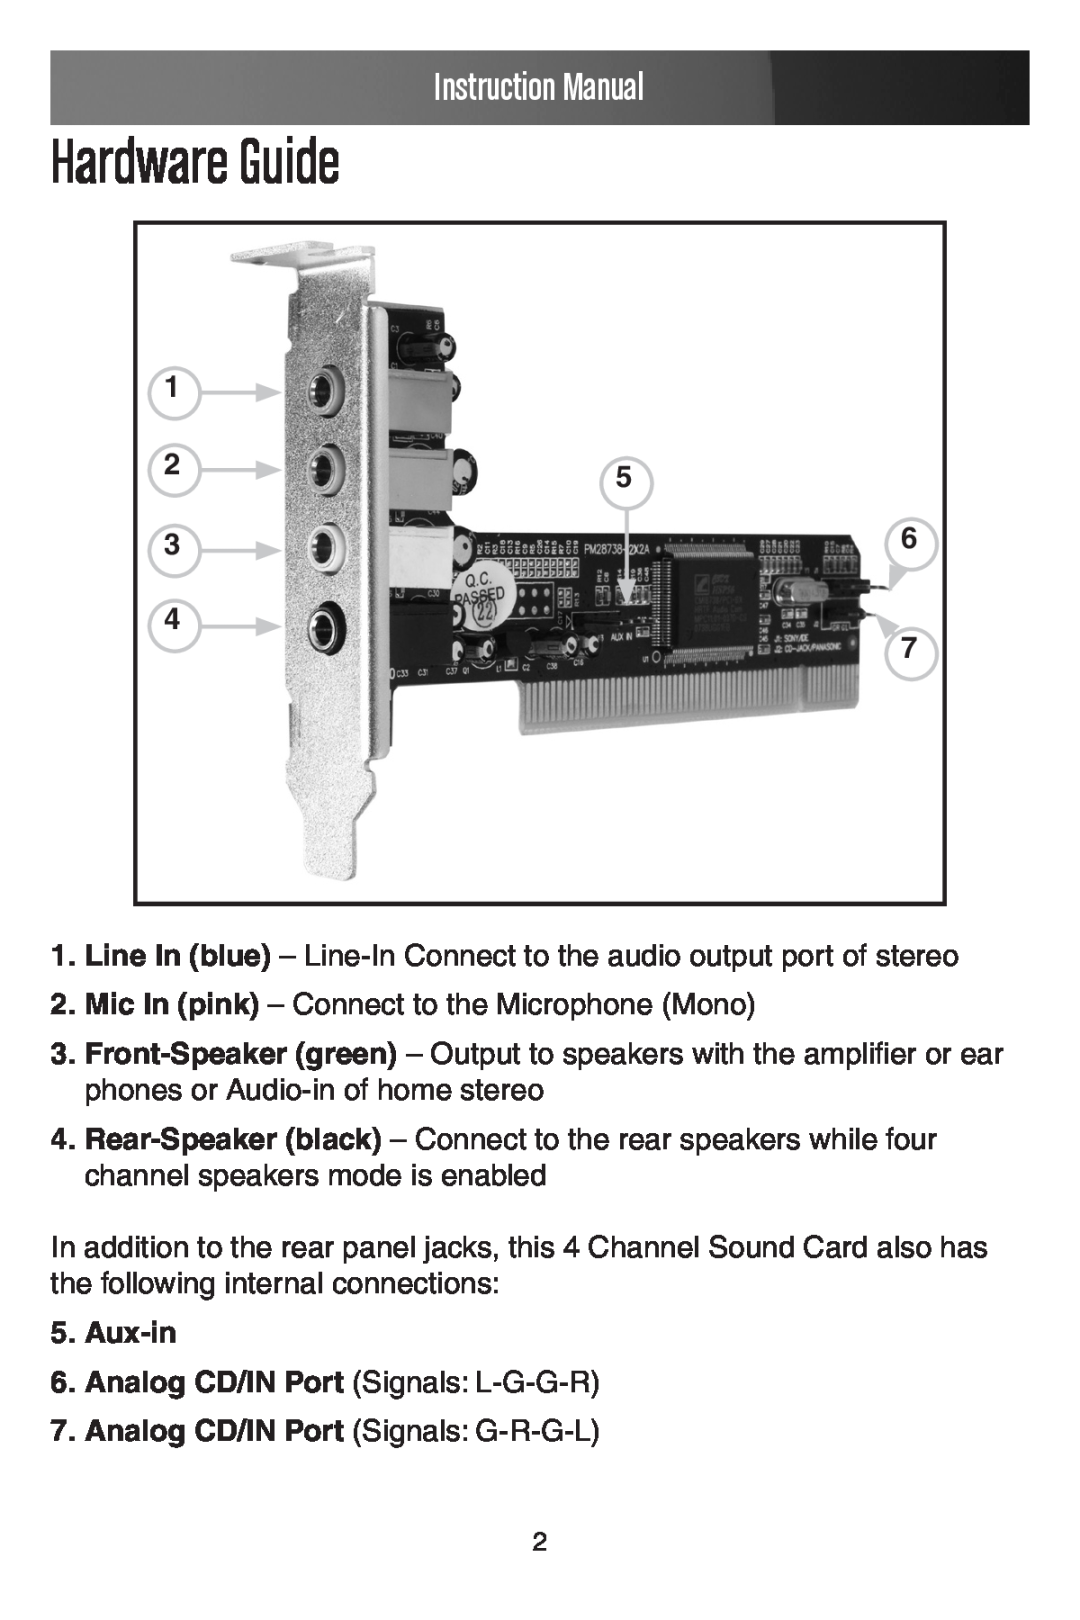 StarTech.com PCISOUND4LP Hardware Guide, Aux-in 6. Analog CD/IN Port Signals L-G-G-R, Analog CD/IN Port Signals G-R-G-L 